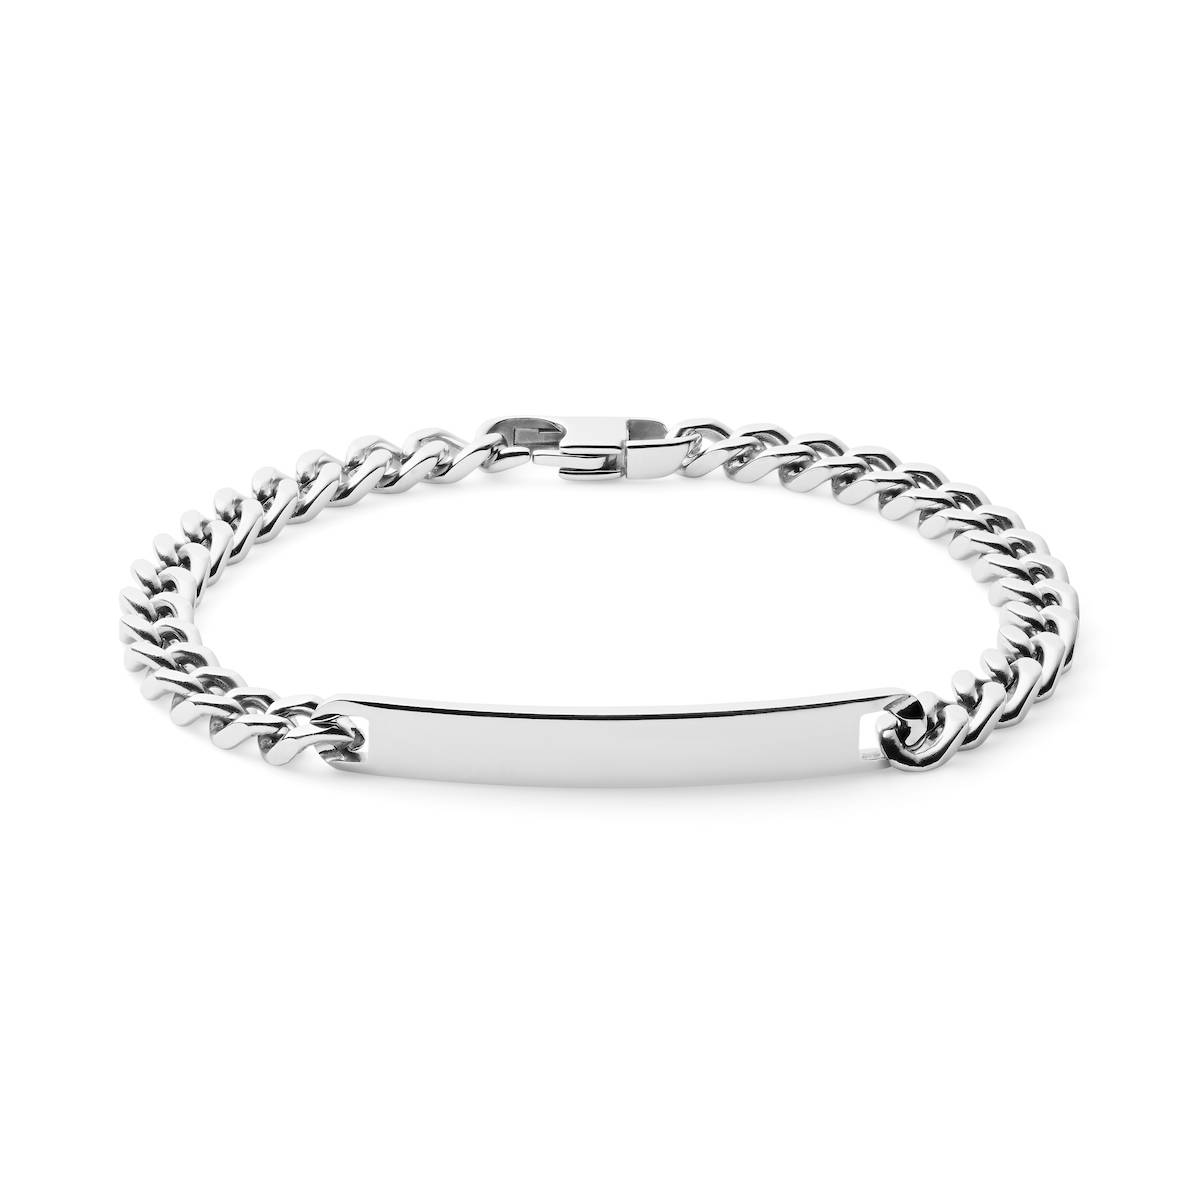 6mm stainless steel id bracelet can be engraved both side of the name plate